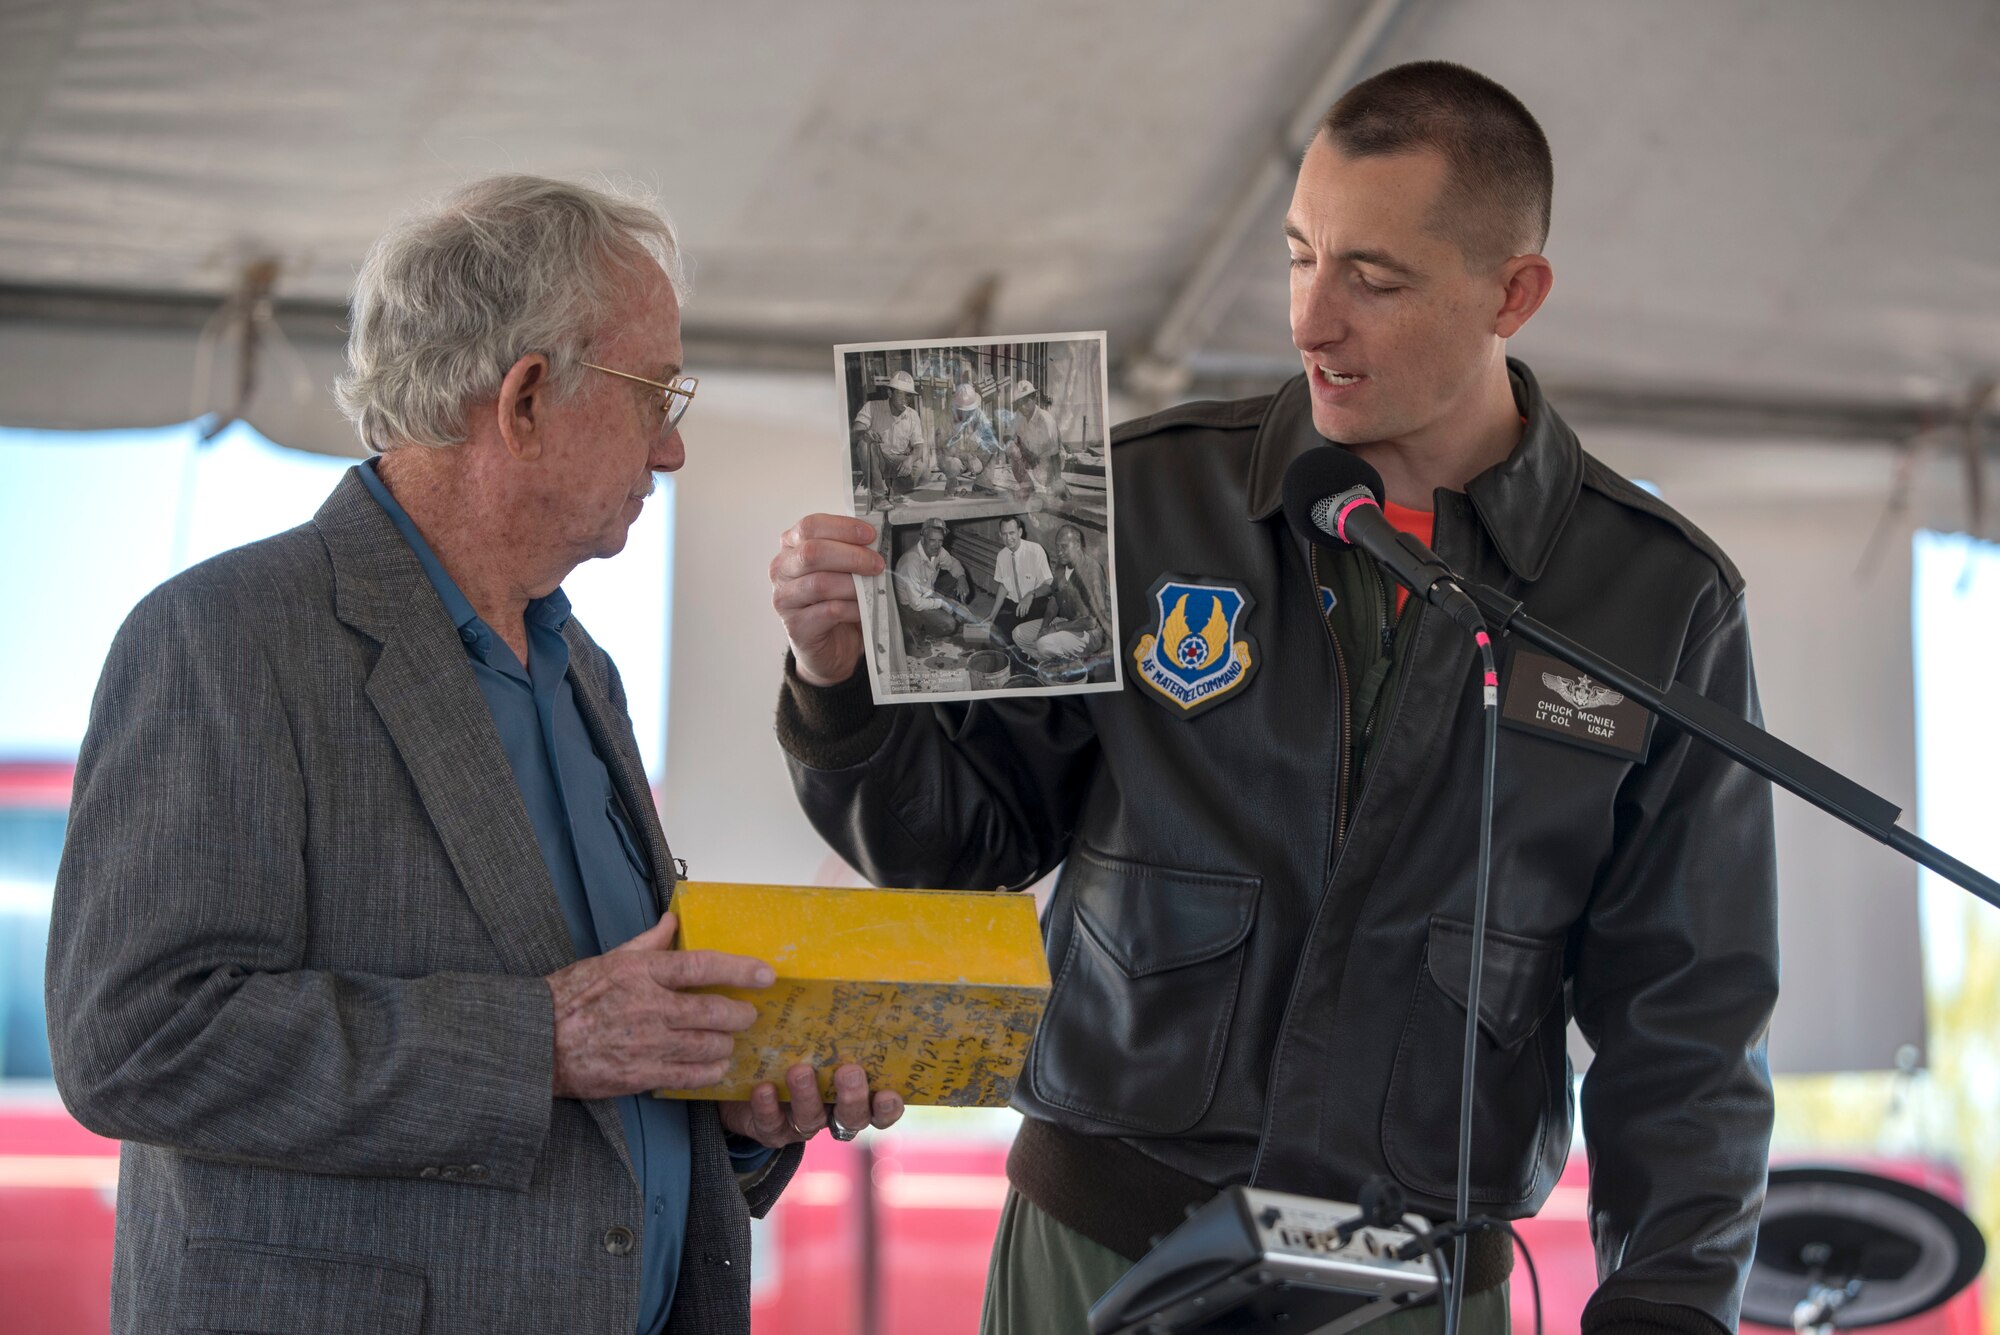 Lt. Col. Charles McNiel, 746th Test Squadron commander, shows a photo of Grady Nicholson, a former 46th Test Group engineer, during a 746th TS 60th anniversary event, Oct. 25, 2019, on Holloman Air Force Base, N.M. The photo shows a picture of Nicholson burying the same time capsule they opened for the anniversary event. (U.S. Air Force photo by Staff Sgt. Christine Groening)